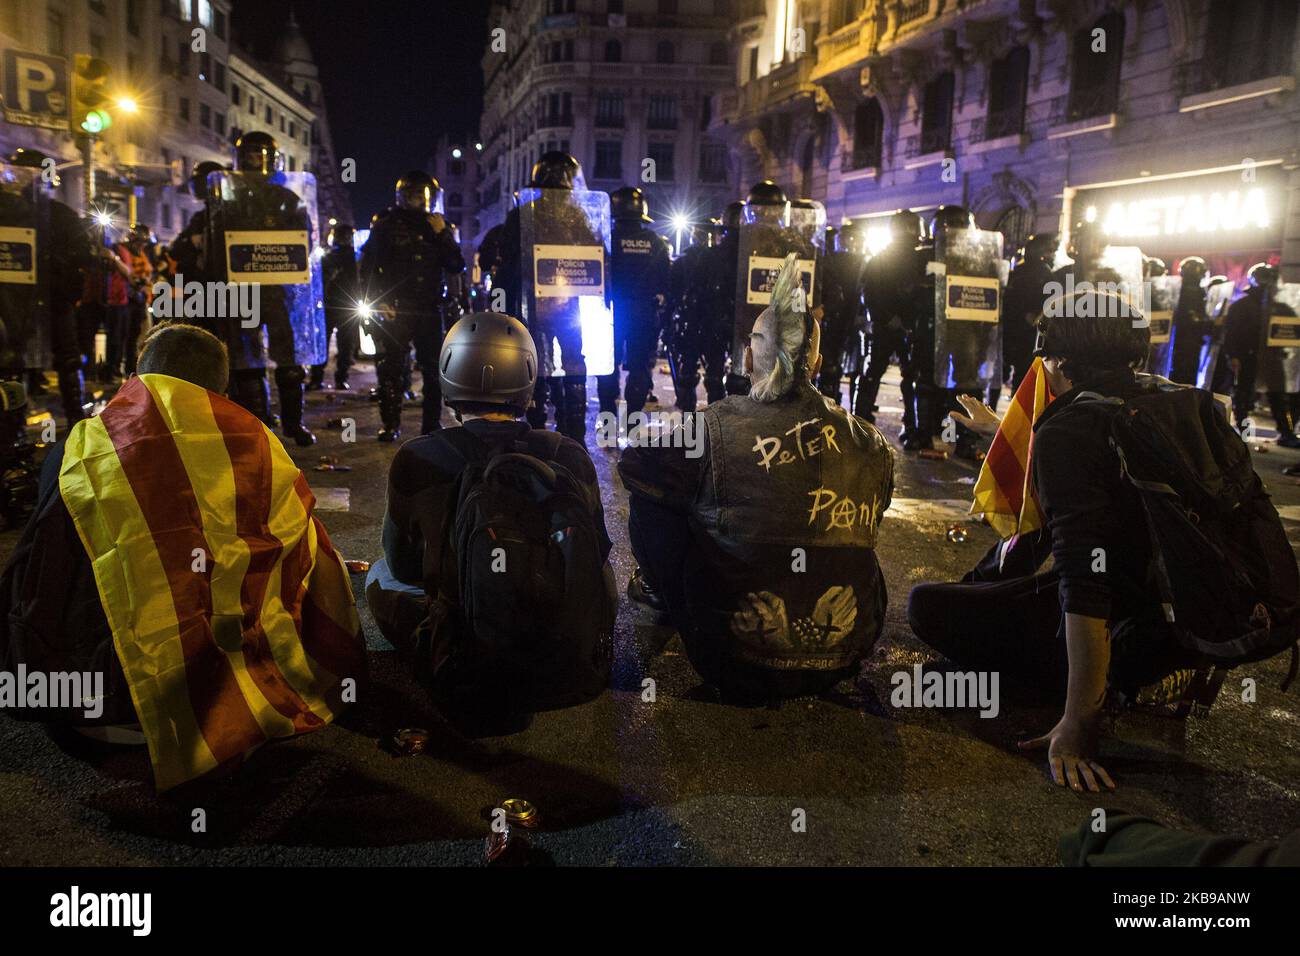 A group of protesters try to resist sitting on the floor. New charges and persecutions with police vans have just dissolved the protesters in the Eixample neighborhood. (Photo by Isidre Garcia Punti/NurPhoto) Stock Photo